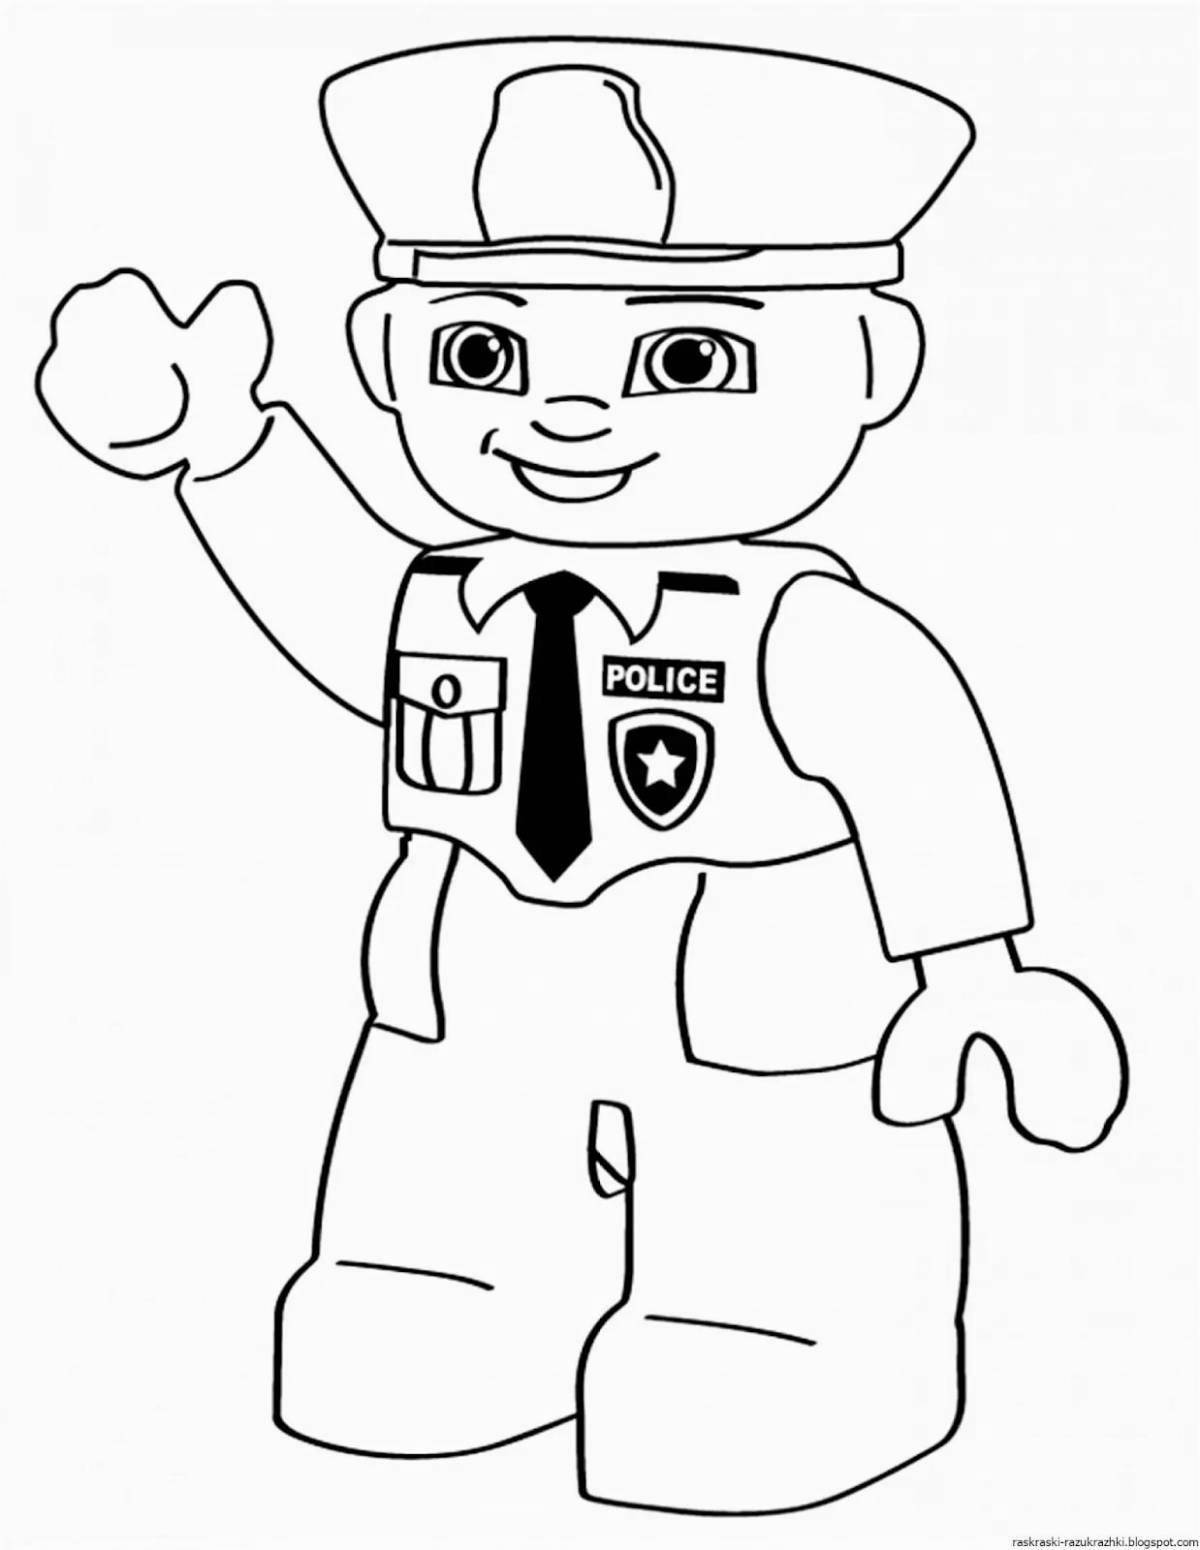 Colorful coloring page for police kids